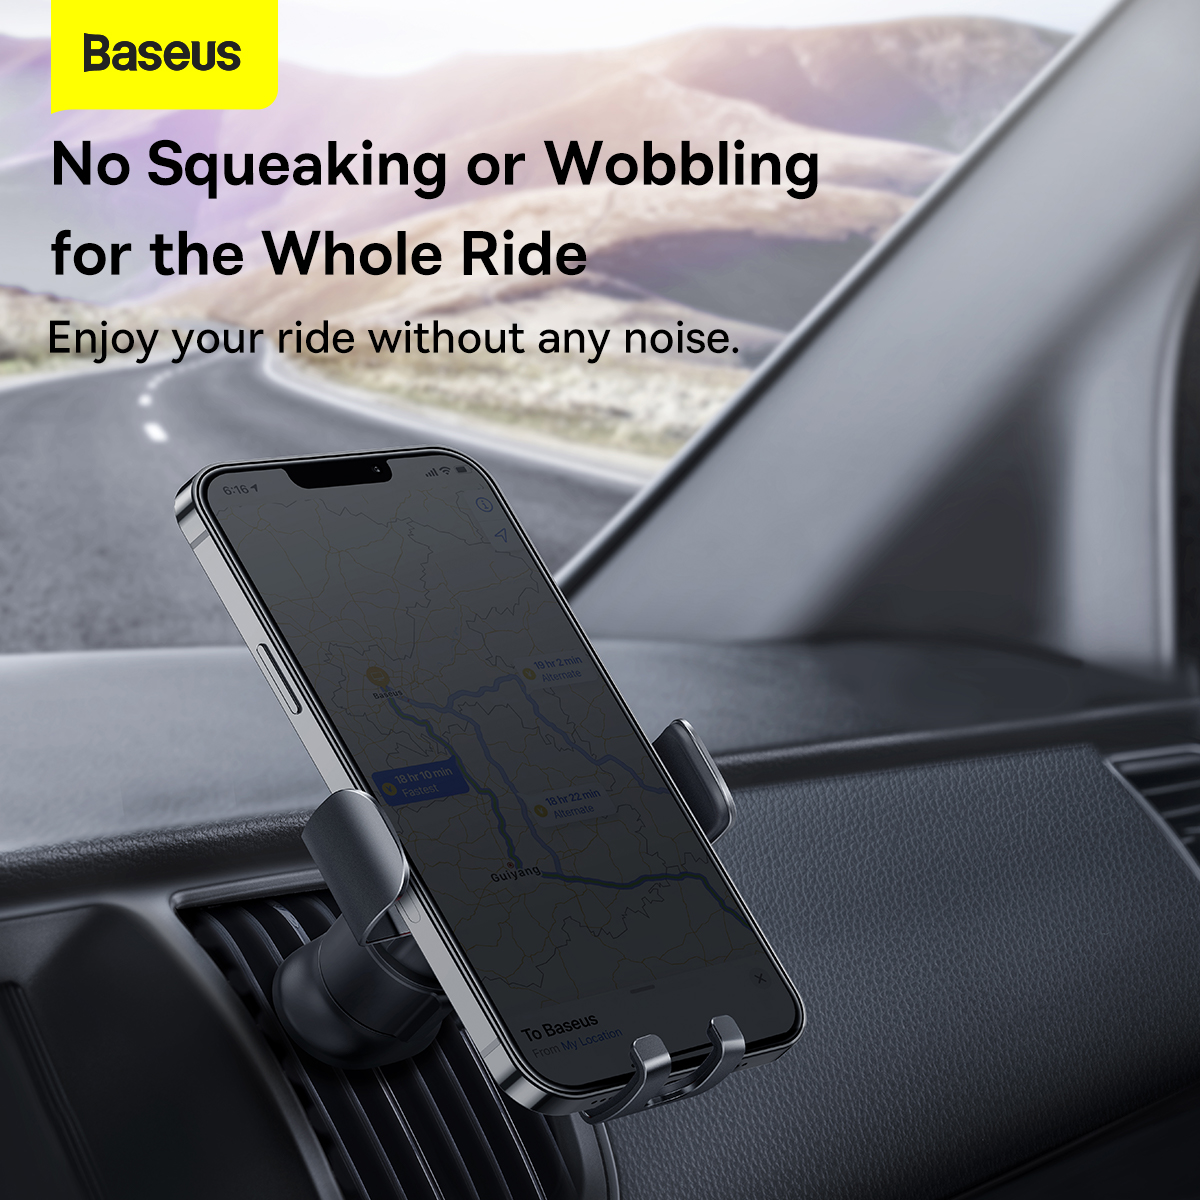 Baseus-Metal-Age-II-New-Gravity-Car-Mount-Phone-Holder-Shockproof-Air-Outlet-Stand-for-47-67-inch-Ph-1932910-5